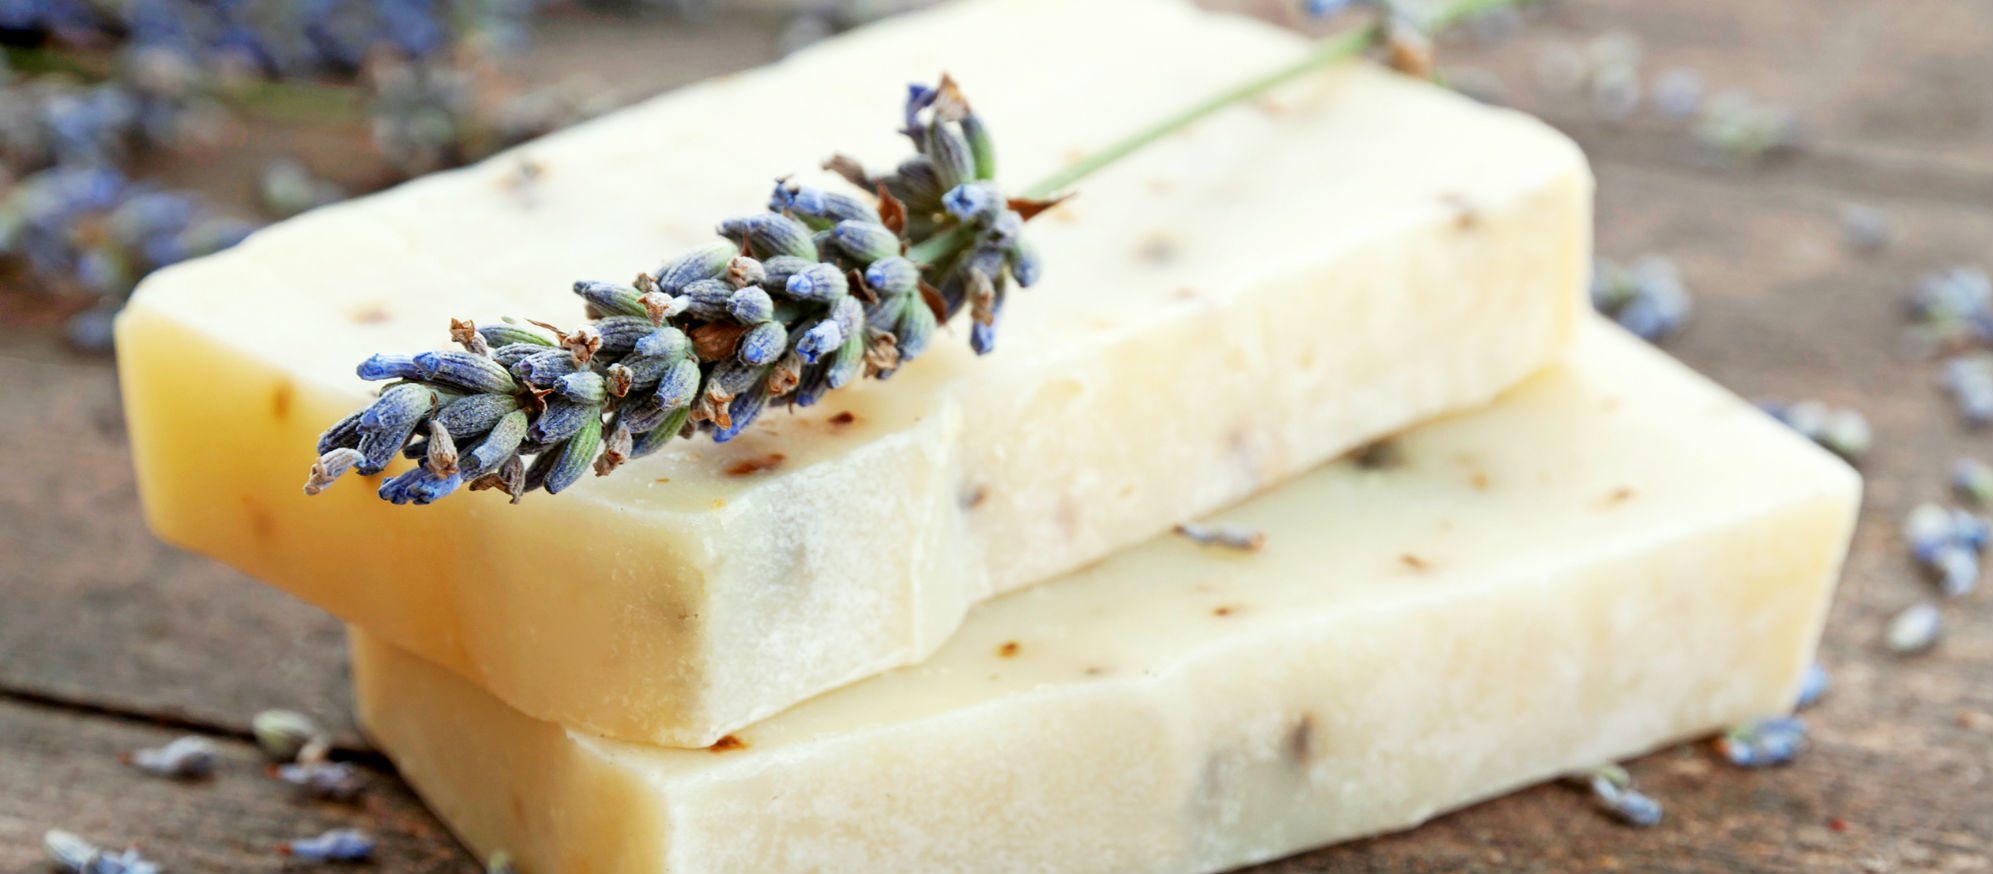 Herbal Soap: The 10 Best Herbs For Use in Soap Making Recipes